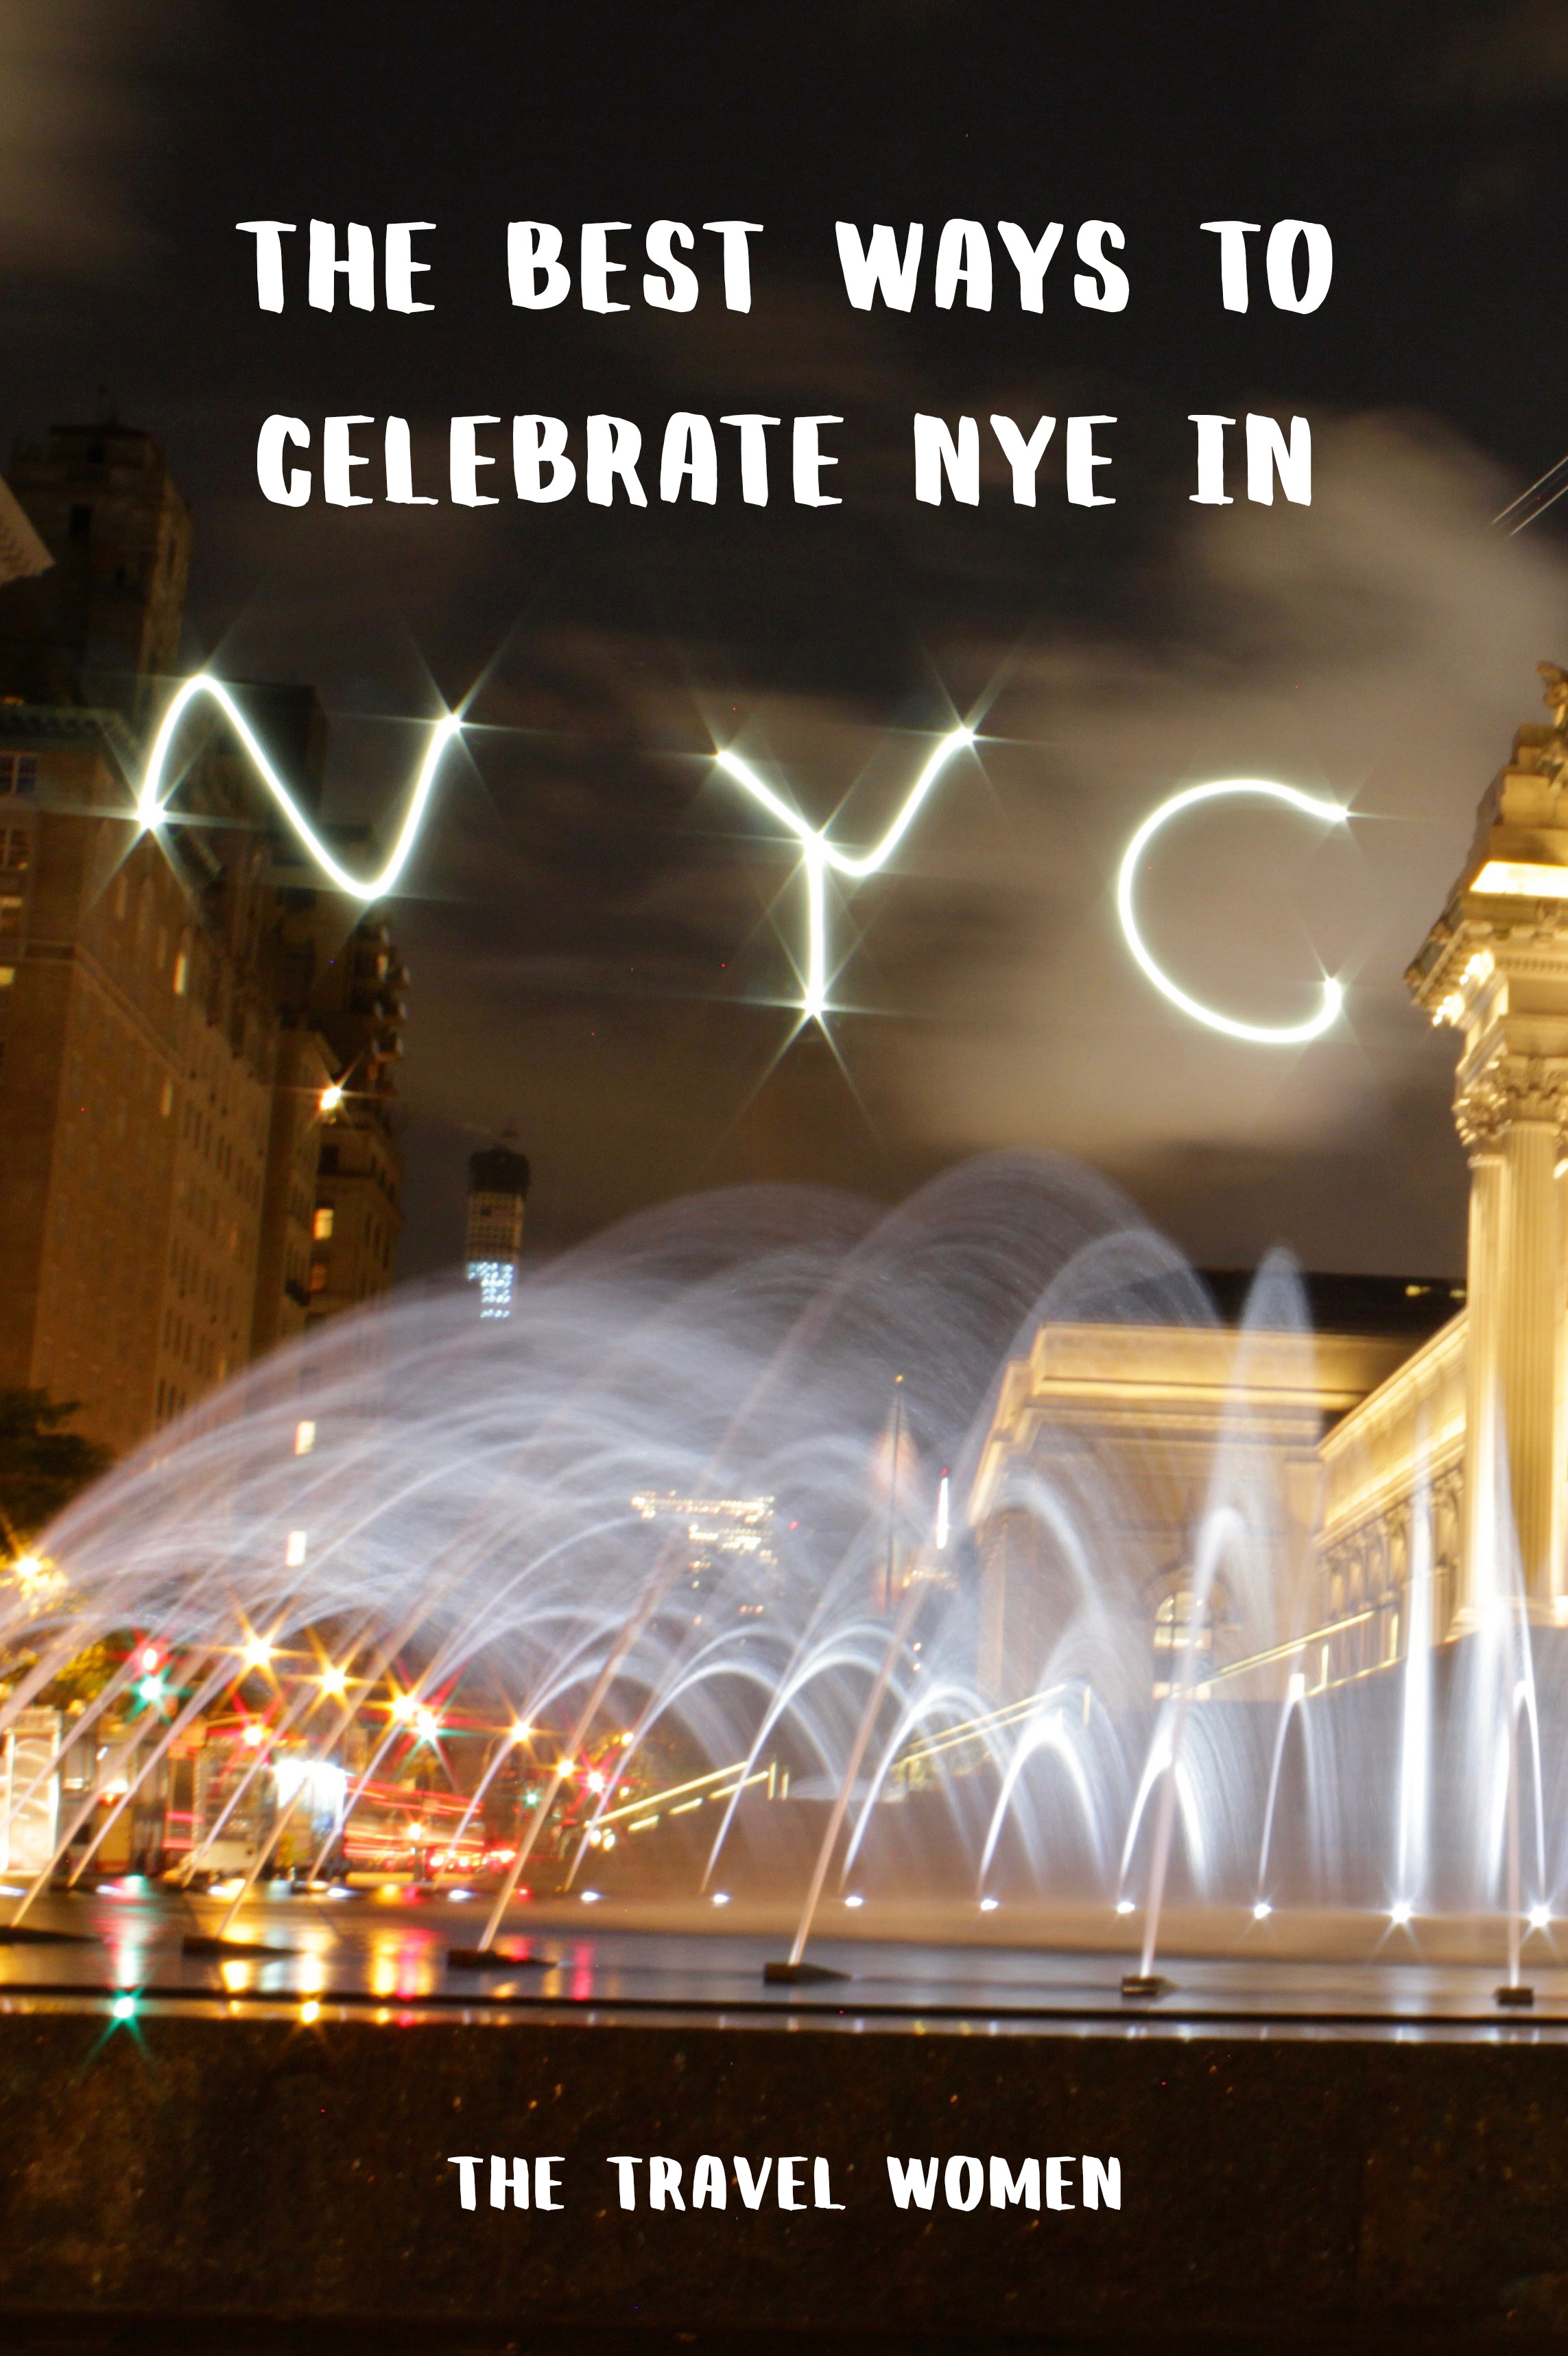 The Best Ways to Celebrate NYE in NYC